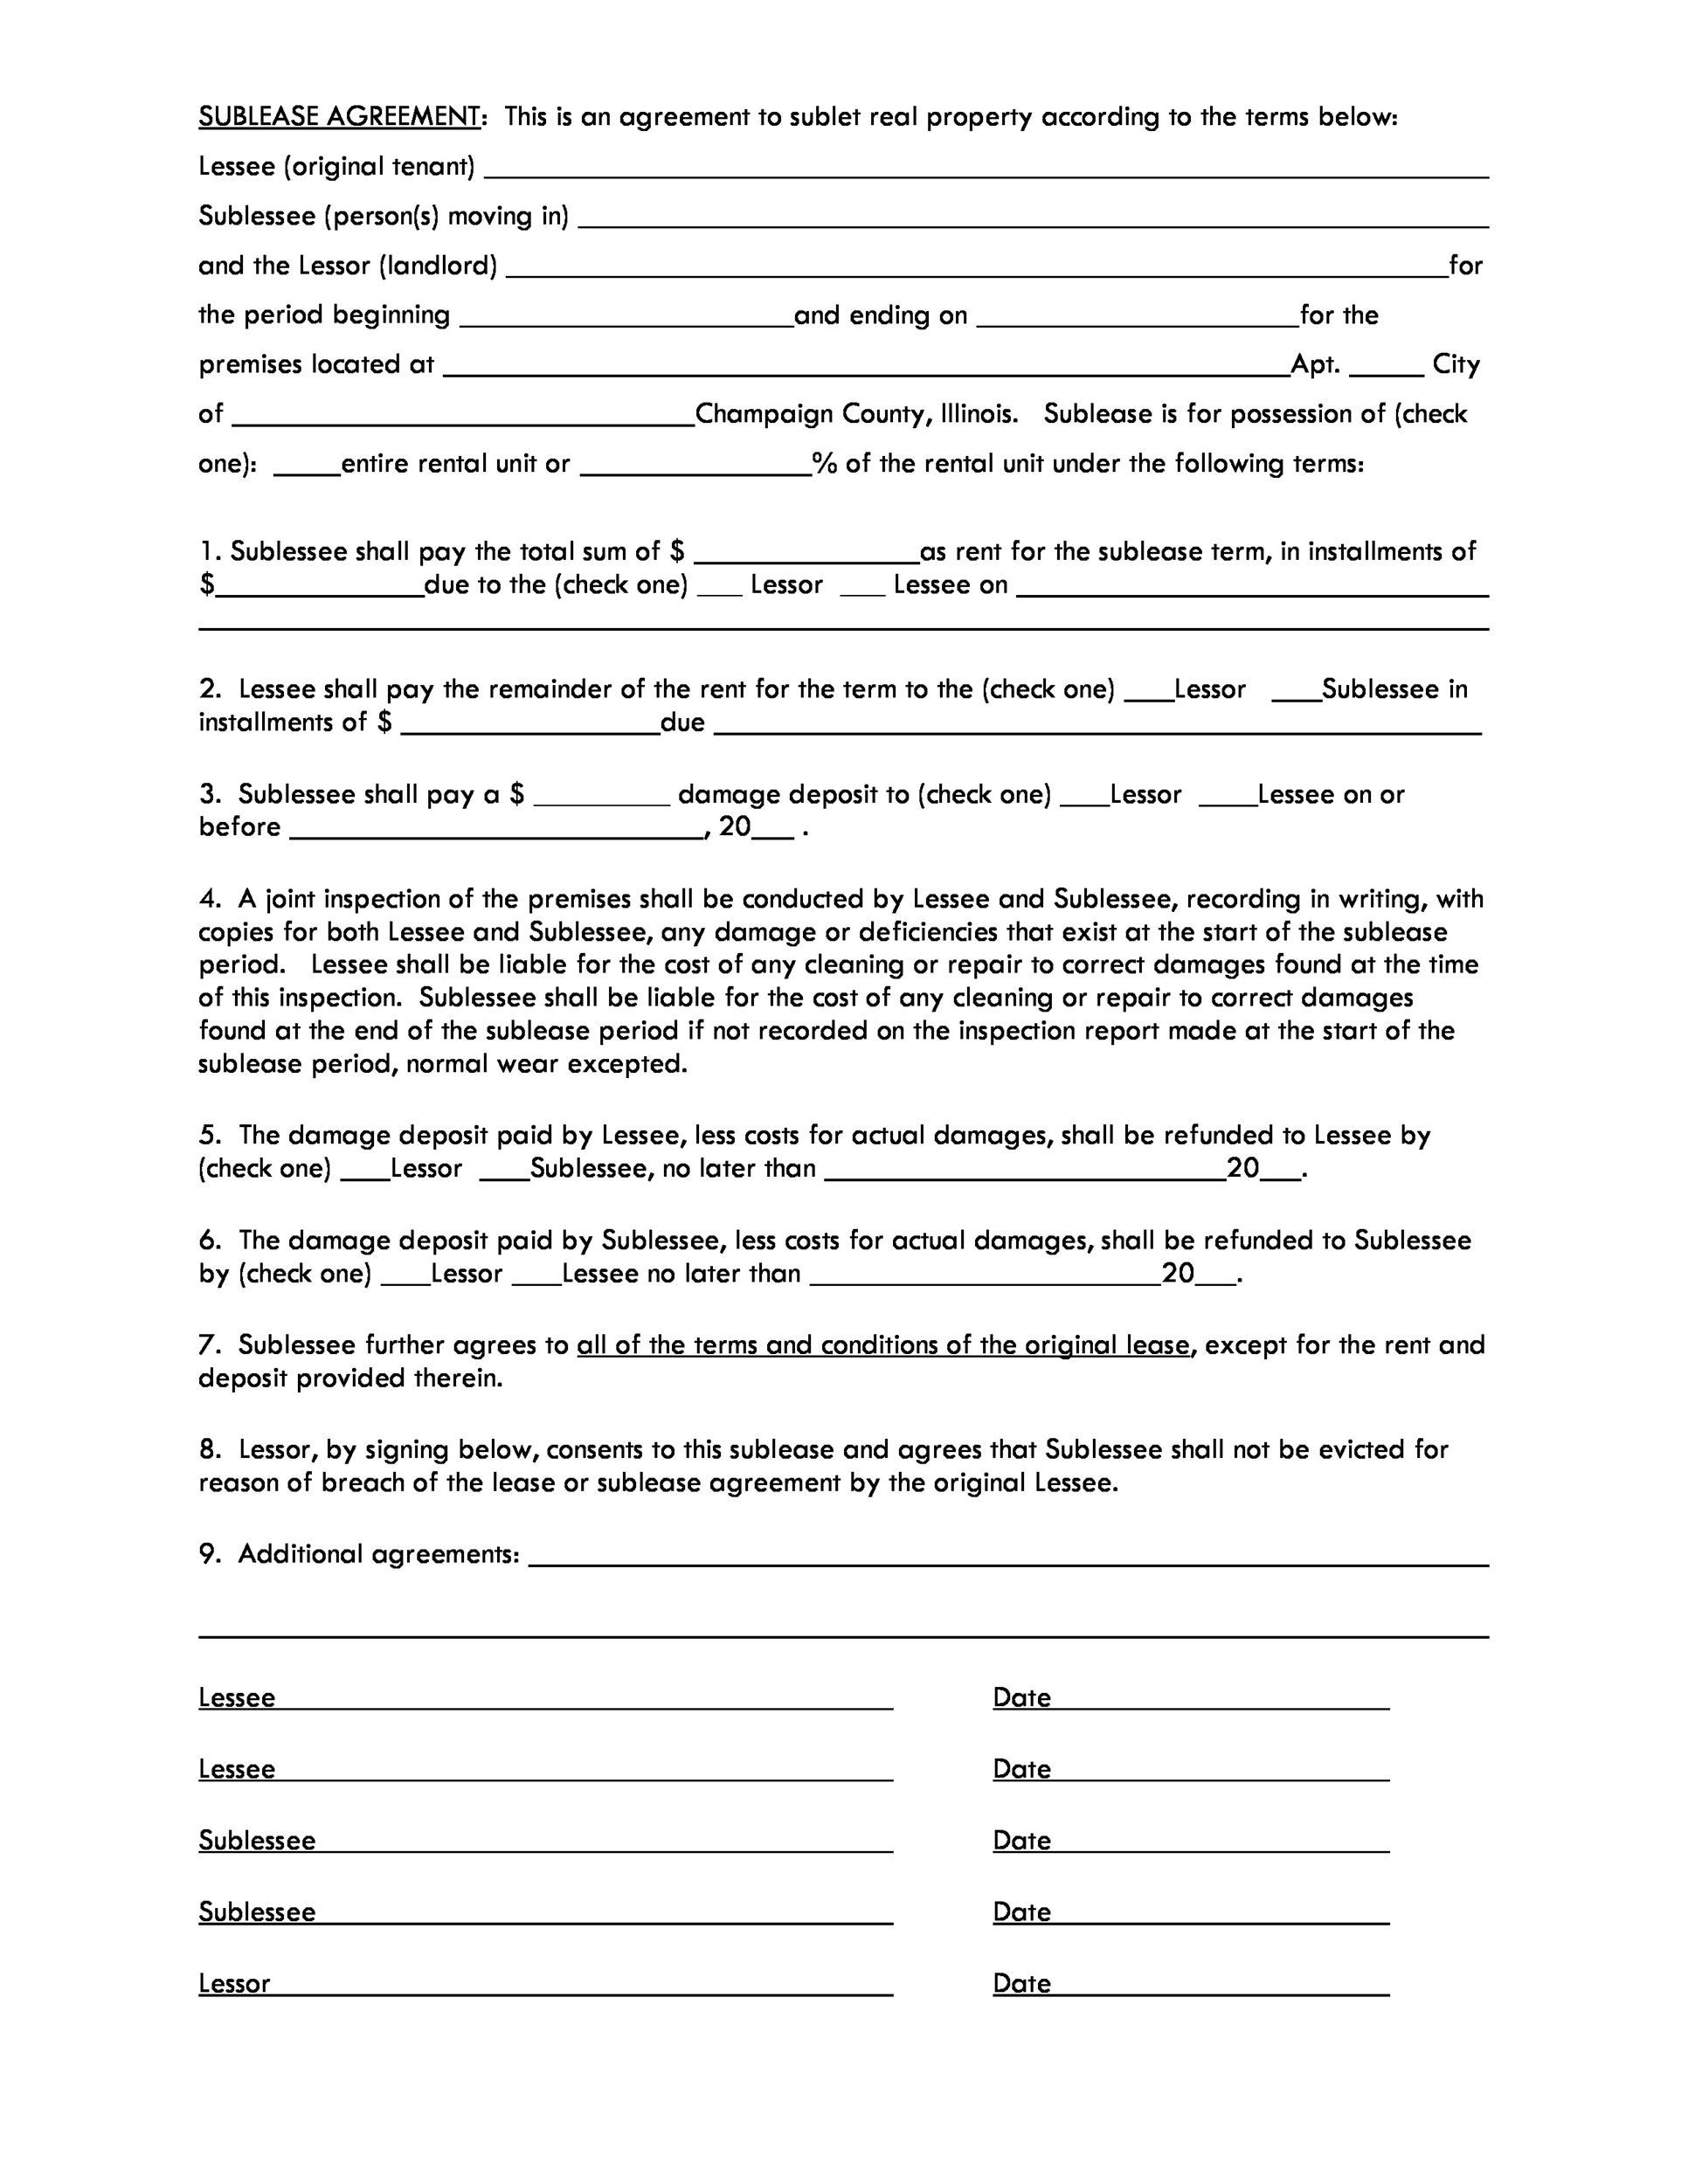 40 Professional Sublease Agreement Templates Forms TemplateLab